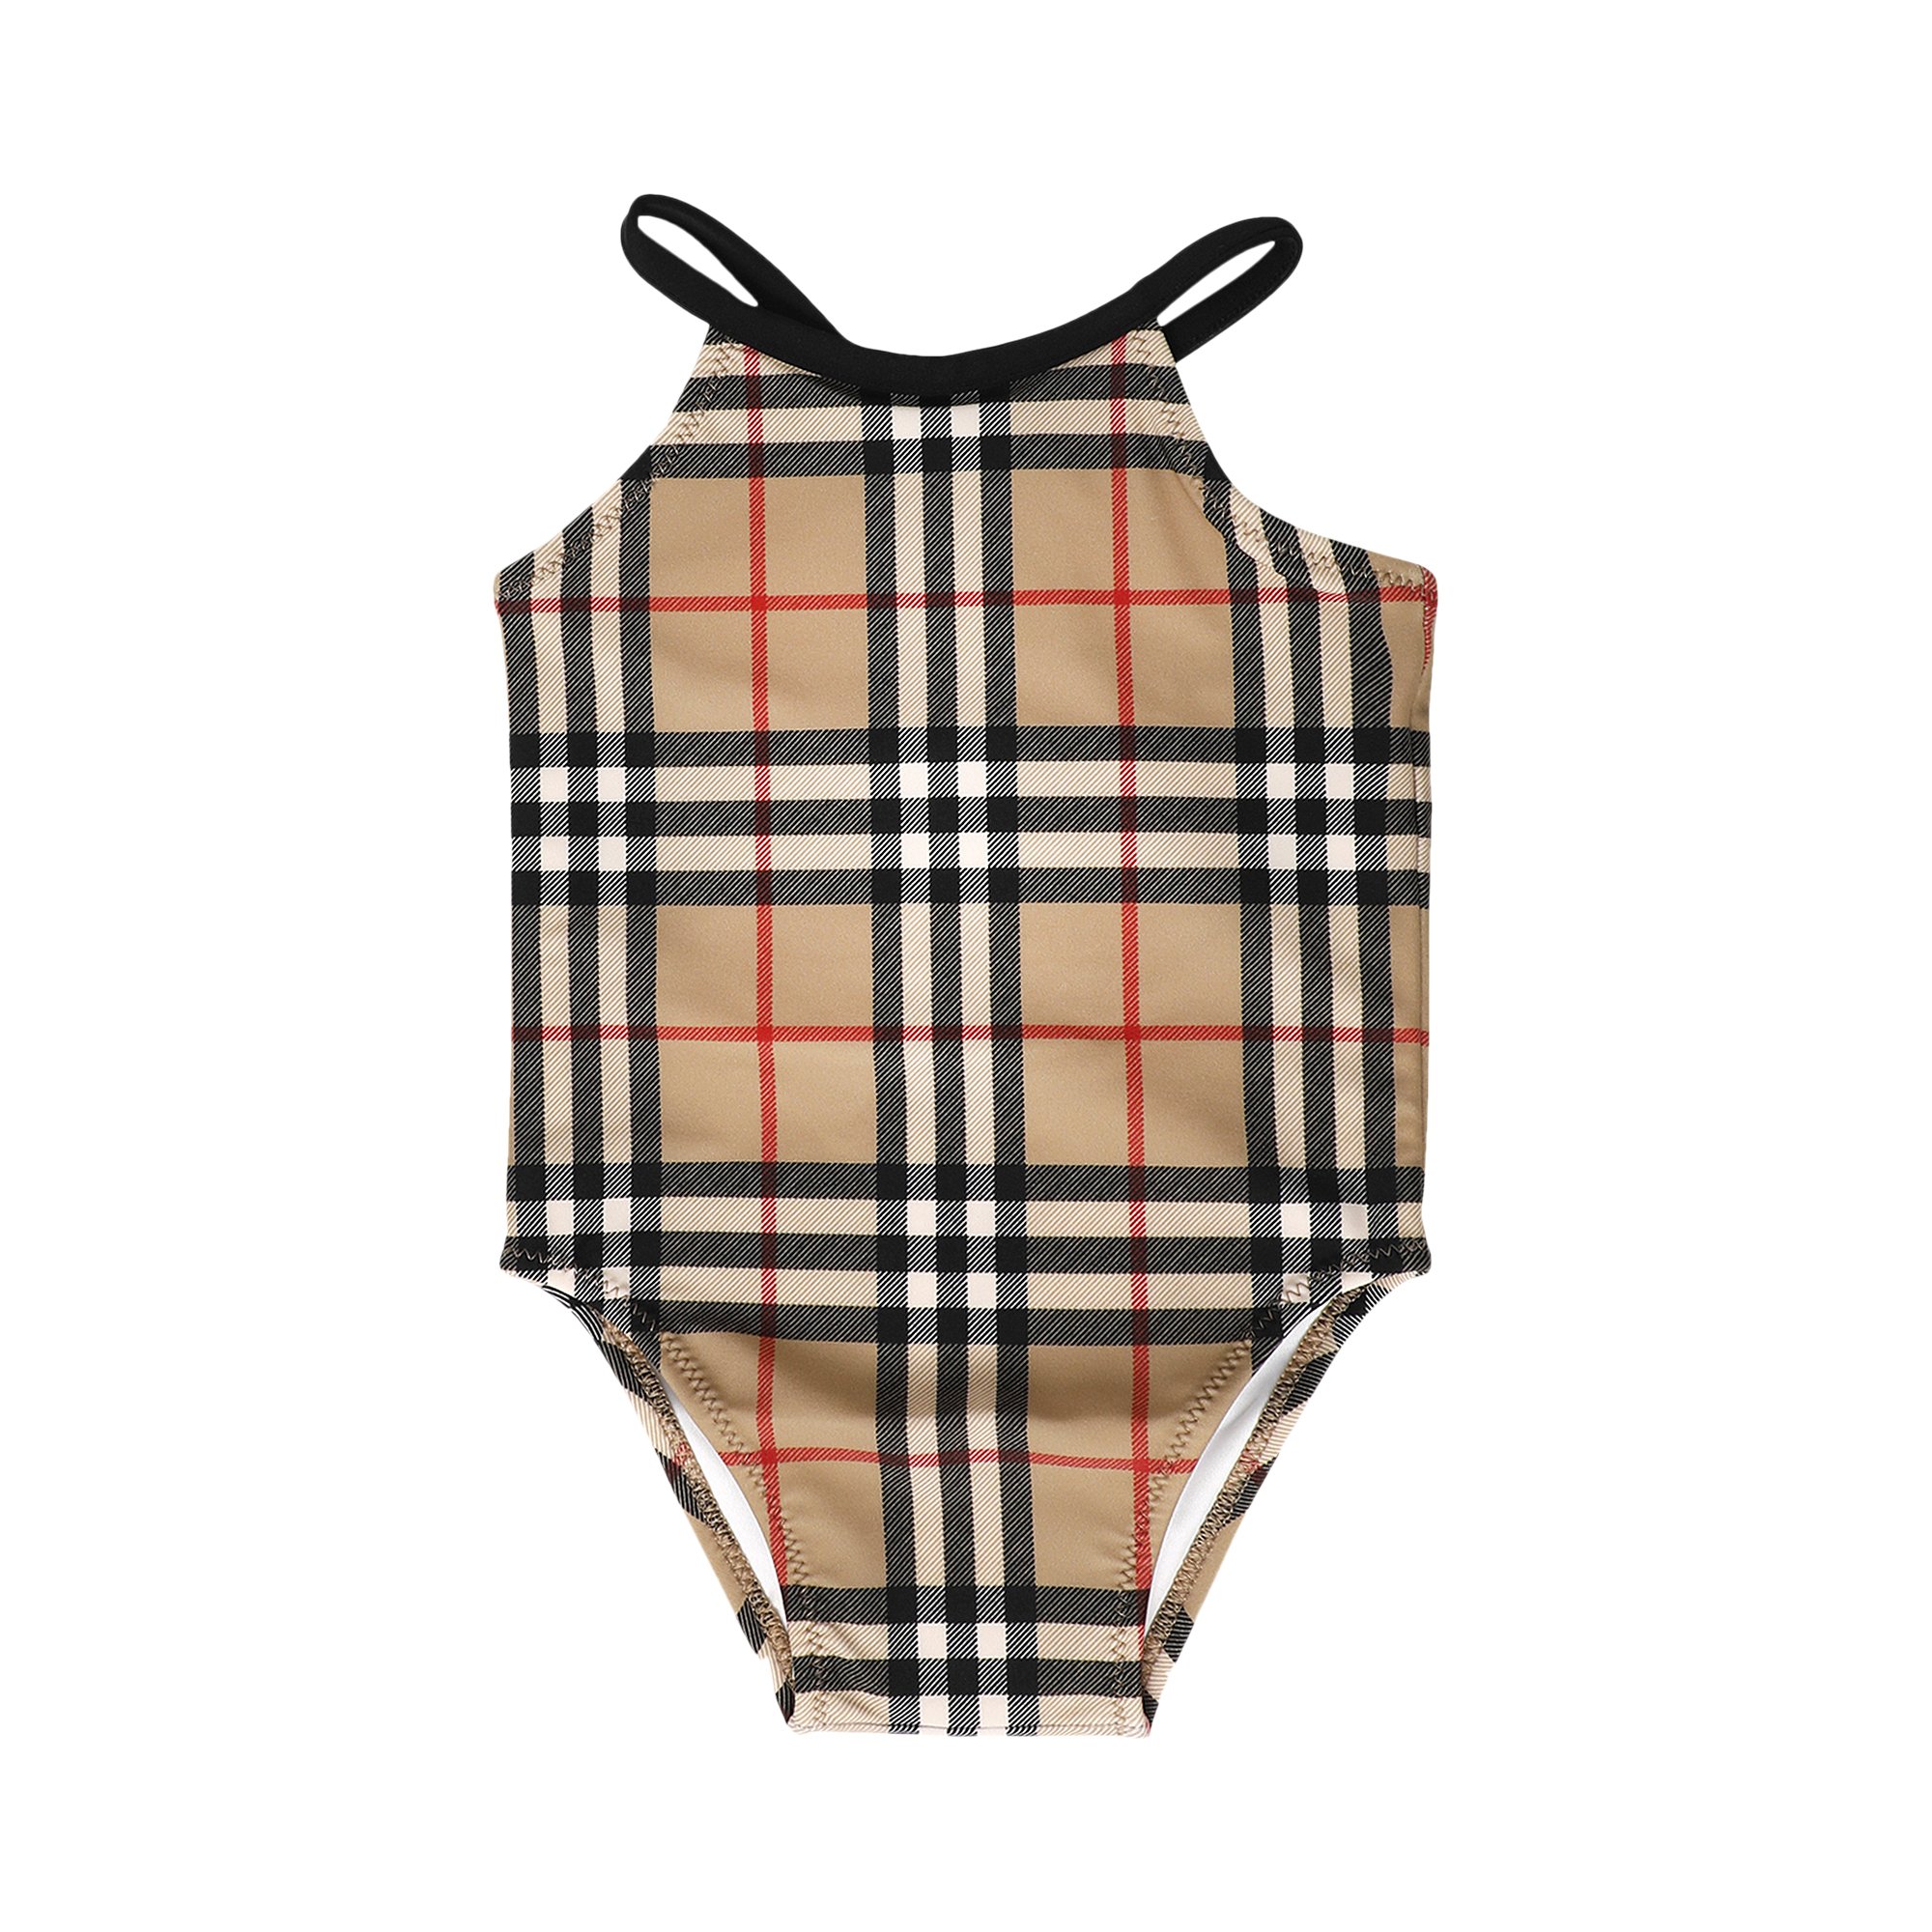 Burberry Kids Check One Piece Swimsuit 'Archive Beige'